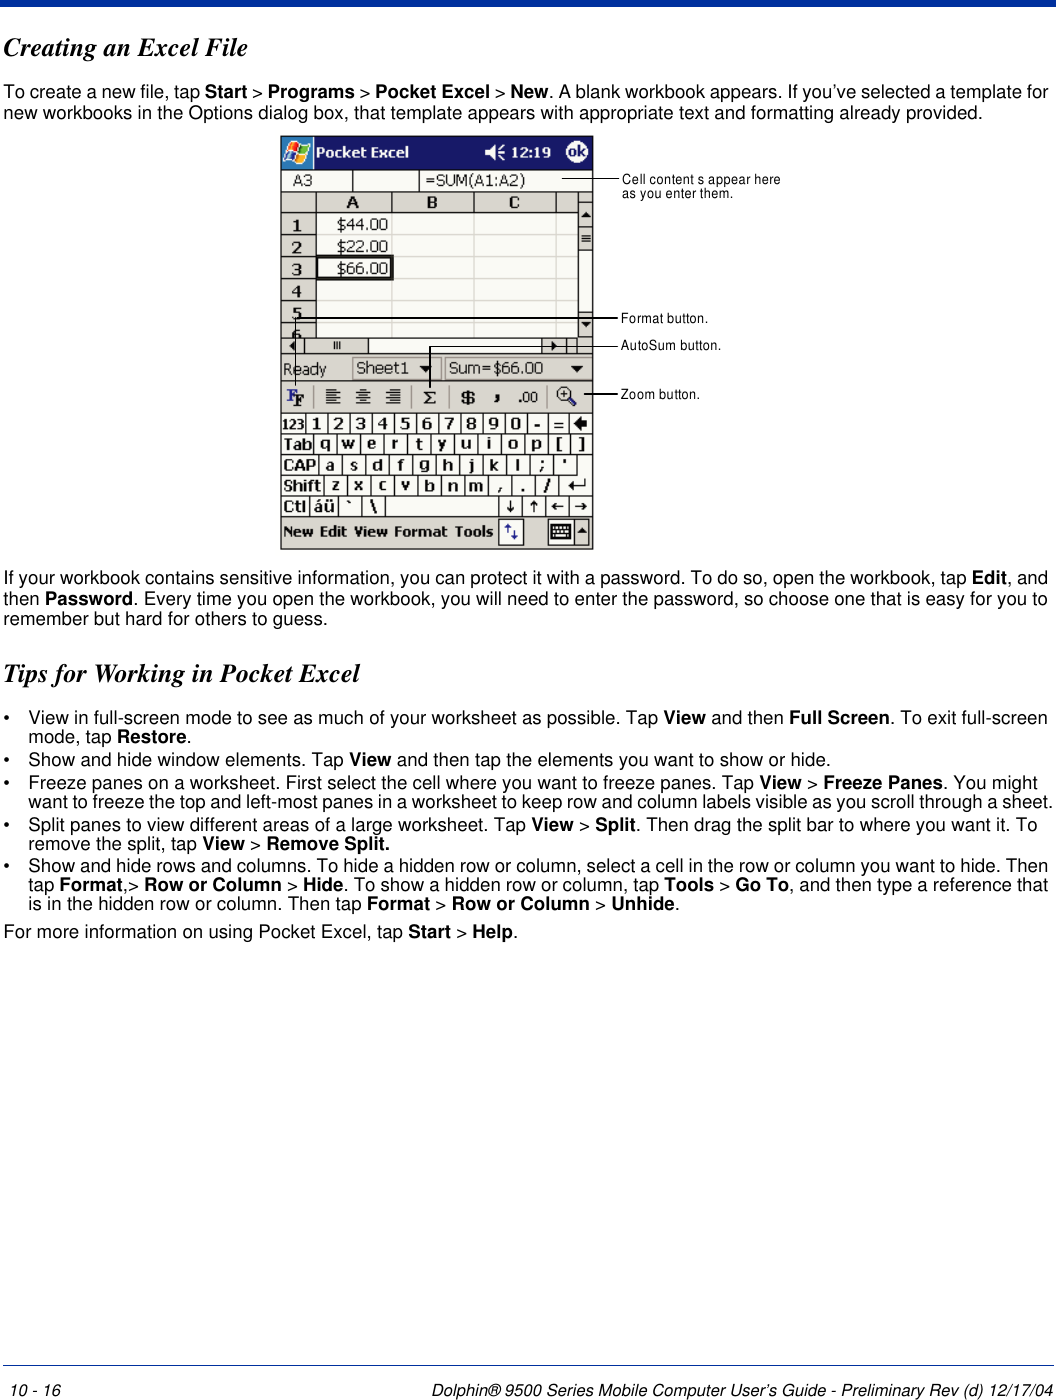 10 - 16 Dolphin® 9500 Series Mobile Computer User’s Guide - Preliminary Rev (d) 12/17/04Creating an Excel FileTo create a new file, tap Start &gt; Programs &gt; Pocket Excel &gt; New. A blank workbook appears. If you’ve selected a template for new workbooks in the Options dialog box, that template appears with appropriate text and formatting already provided. If your workbook contains sensitive information, you can protect it with a password. To do so, open the workbook, tap Edit, and then Password. Every time you open the workbook, you will need to enter the password, so choose one that is easy for you to remember but hard for others to guess.Tips for Working in Pocket Excel•           View in full-screen mode to see as much of your worksheet as possible. Tap View and then Full Screen. To exit full-screen mode, tap Restore.•           Show and hide window elements. Tap View and then tap the elements you want to show or hide.•           Freeze panes on a worksheet. First select the cell where you want to freeze panes. Tap View &gt; Freeze Panes. You might want to freeze the top and left-most panes in a worksheet to keep row and column labels visible as you scroll through a sheet.•           Split panes to view different areas of a large worksheet. Tap View &gt; Split. Then drag the split bar to where you want it. To remove the split, tap View &gt; Remove Split.•           Show and hide rows and columns. To hide a hidden row or column, select a cell in the row or column you want to hide. Then tap Format,&gt; Row or Column &gt; Hide. To show a hidden row or column, tap Tools &gt; Go To, and then type a reference that is in the hidden row or column. Then tap Format &gt; Row or Column &gt; Unhide.For more information on using Pocket Excel, tap Start &gt; Help.Cell content s appear hereas you enter them.AutoSum button.Format button.Zoom button.